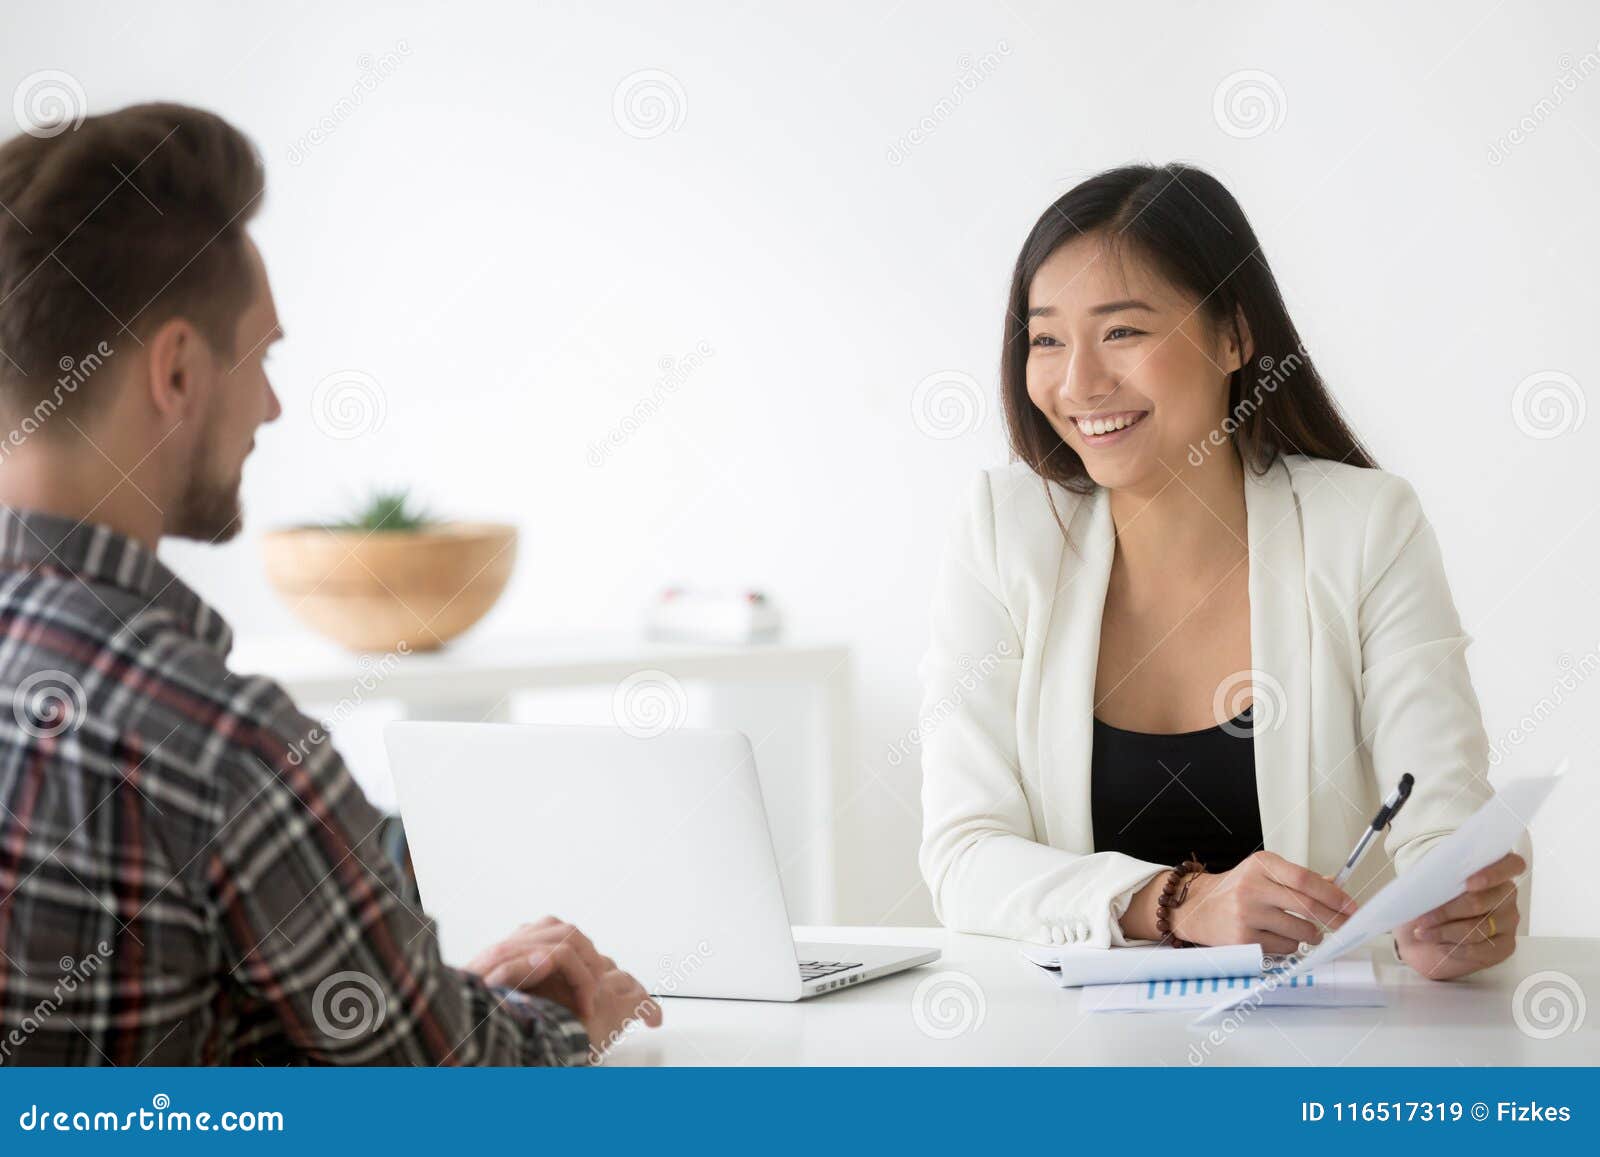 friendly asian hr smiling talking to candidate at job interview